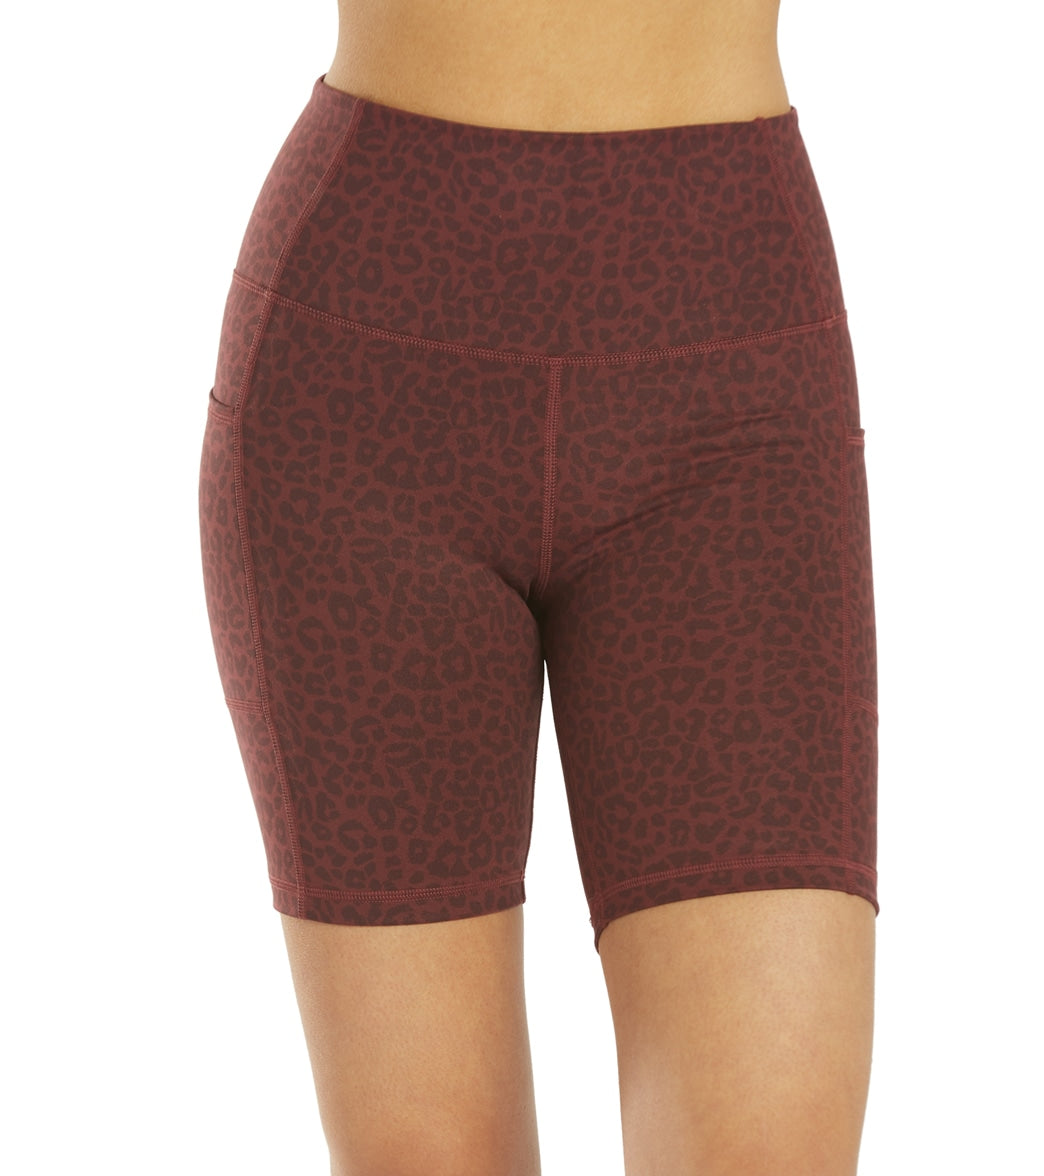 Everyday Yoga Uphold Cheetah High Waisted Biker Shorts with Pockets 7